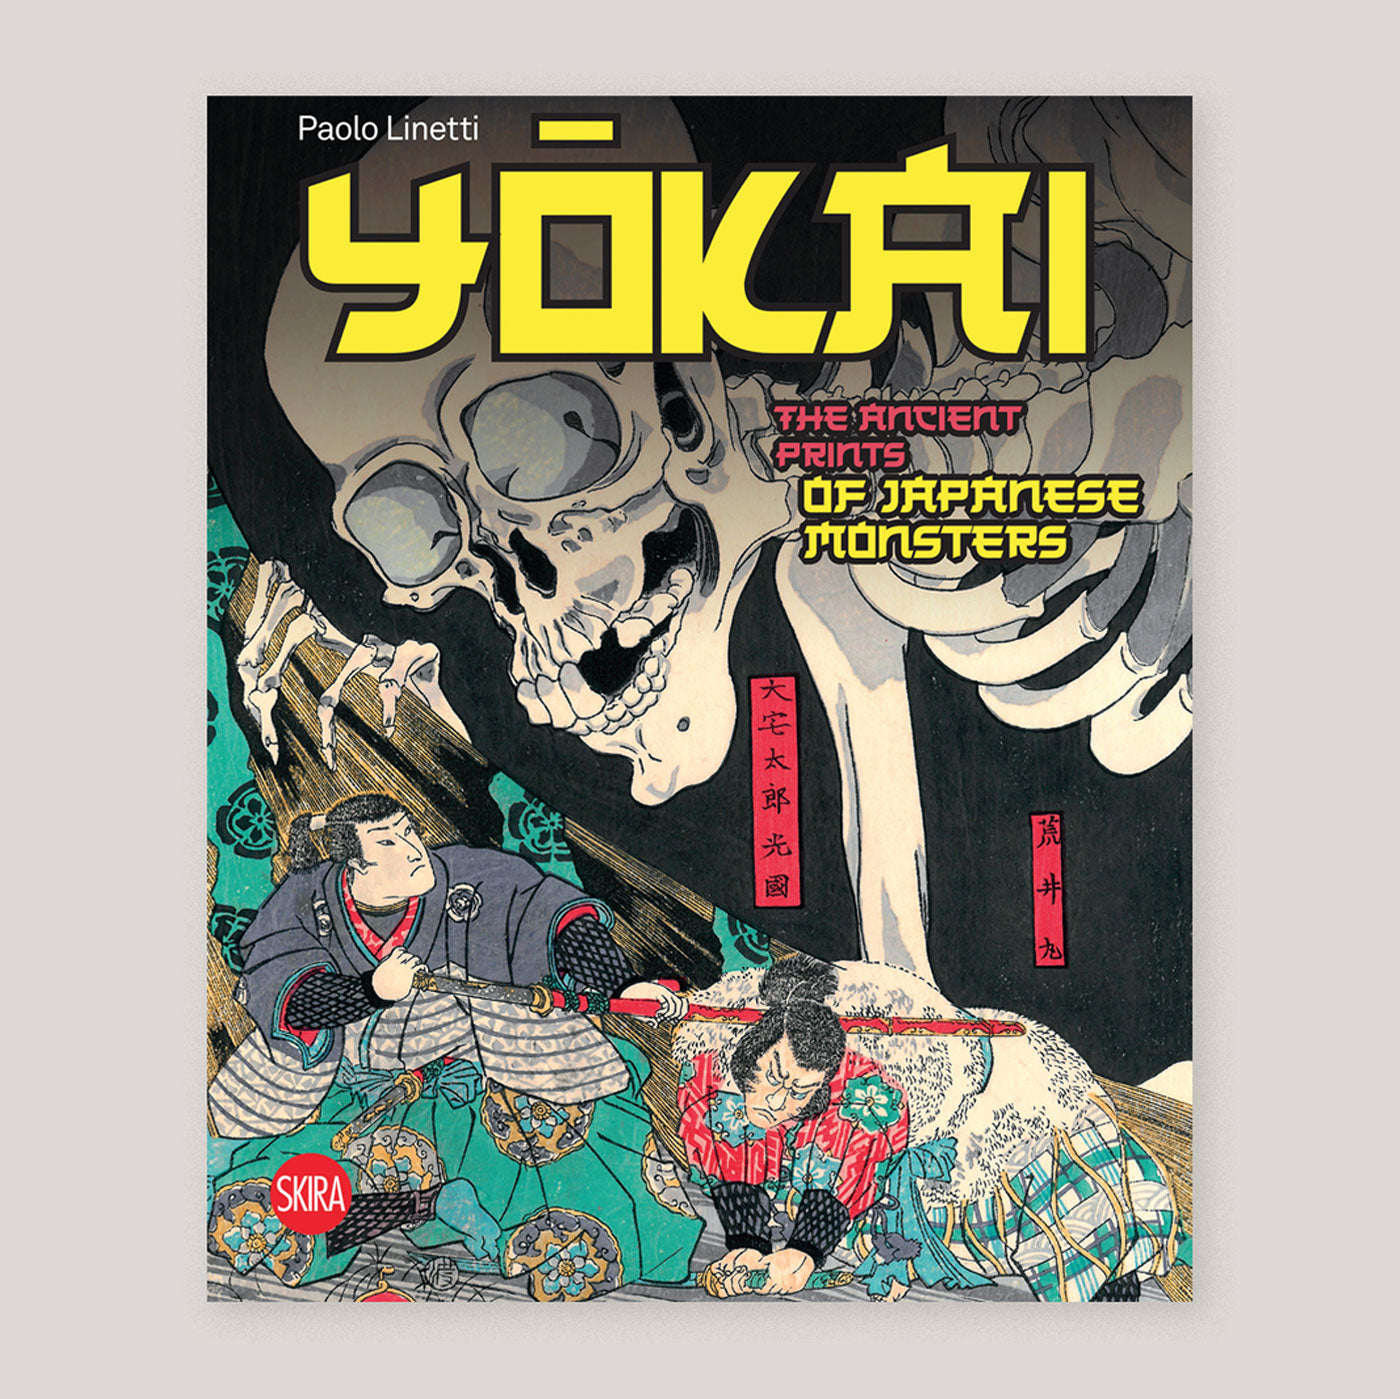 Yokai: The Ancient Prints of Japanese Monsters | Paolo Linetti | Colours May Vary 